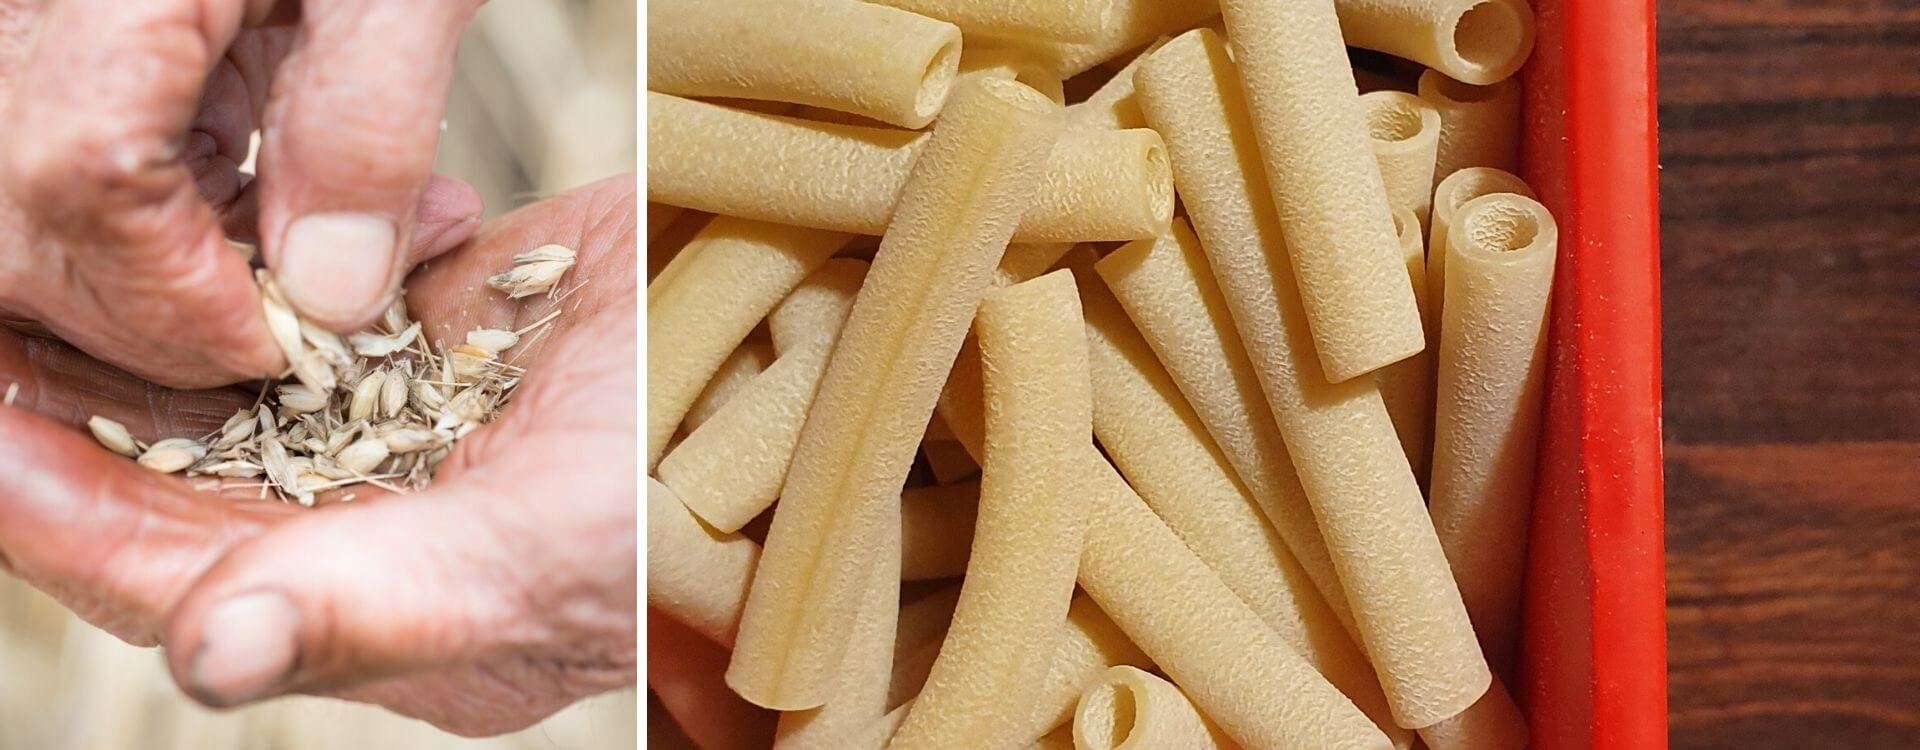 THE BEST SPECIALTY FOOD OF CAMPANIA: PASTA FROM GRAGNANO